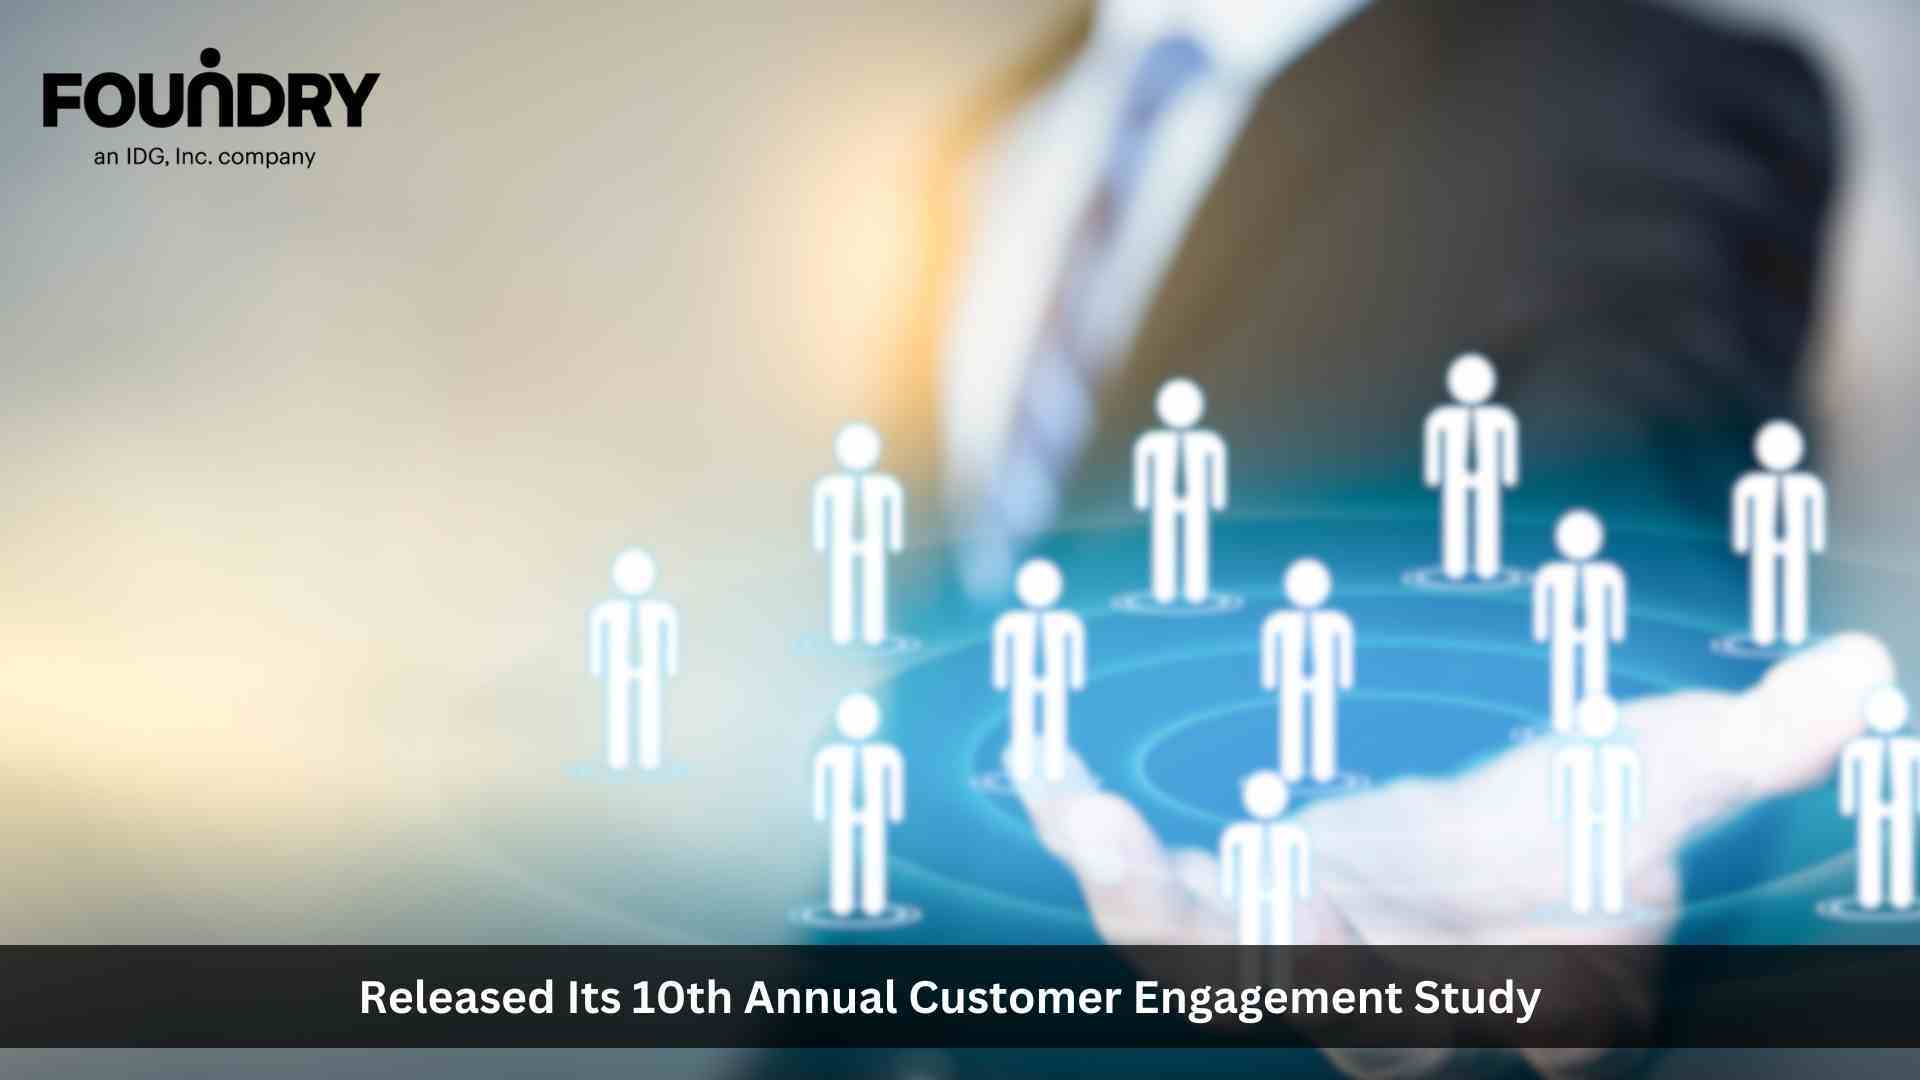 10th Annual Customer Engagement Study Reveals Generational Shifts in How IT Decision Makers Engage with Technology Content and Advertising